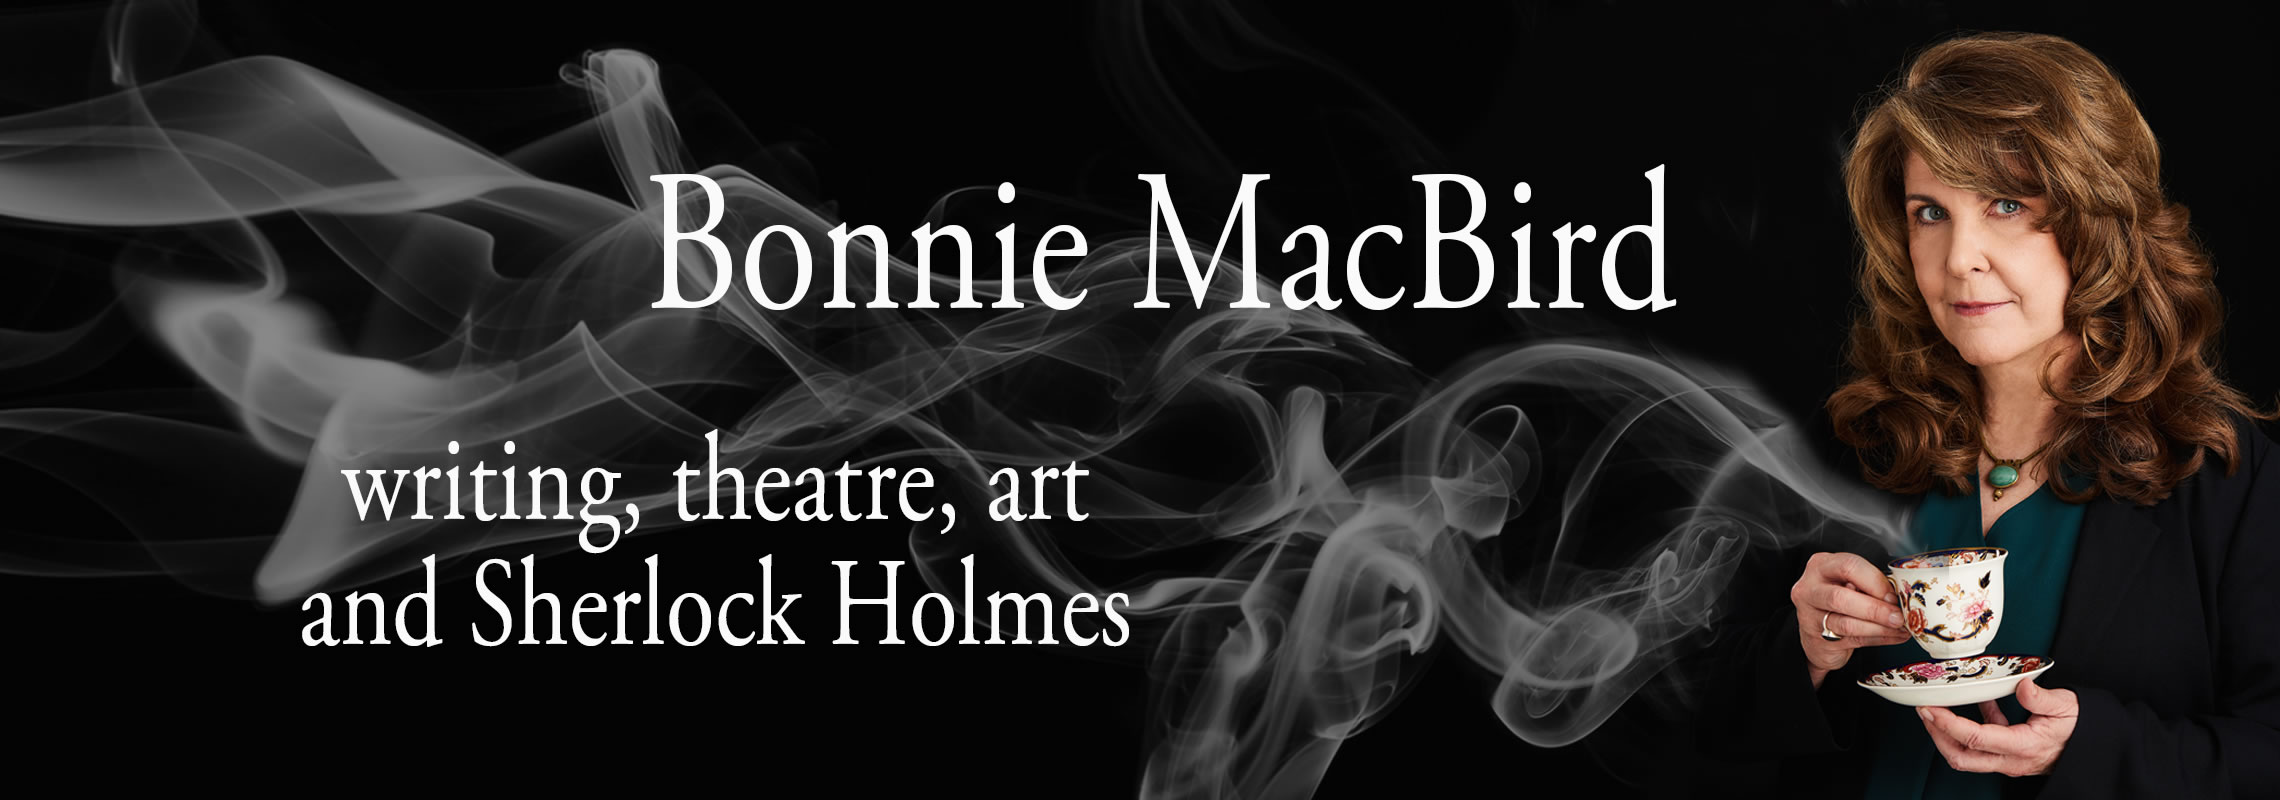 Bonnie MacBird: Unabashed enthusiasm for writing, theatre, art and Sherlock Holmes